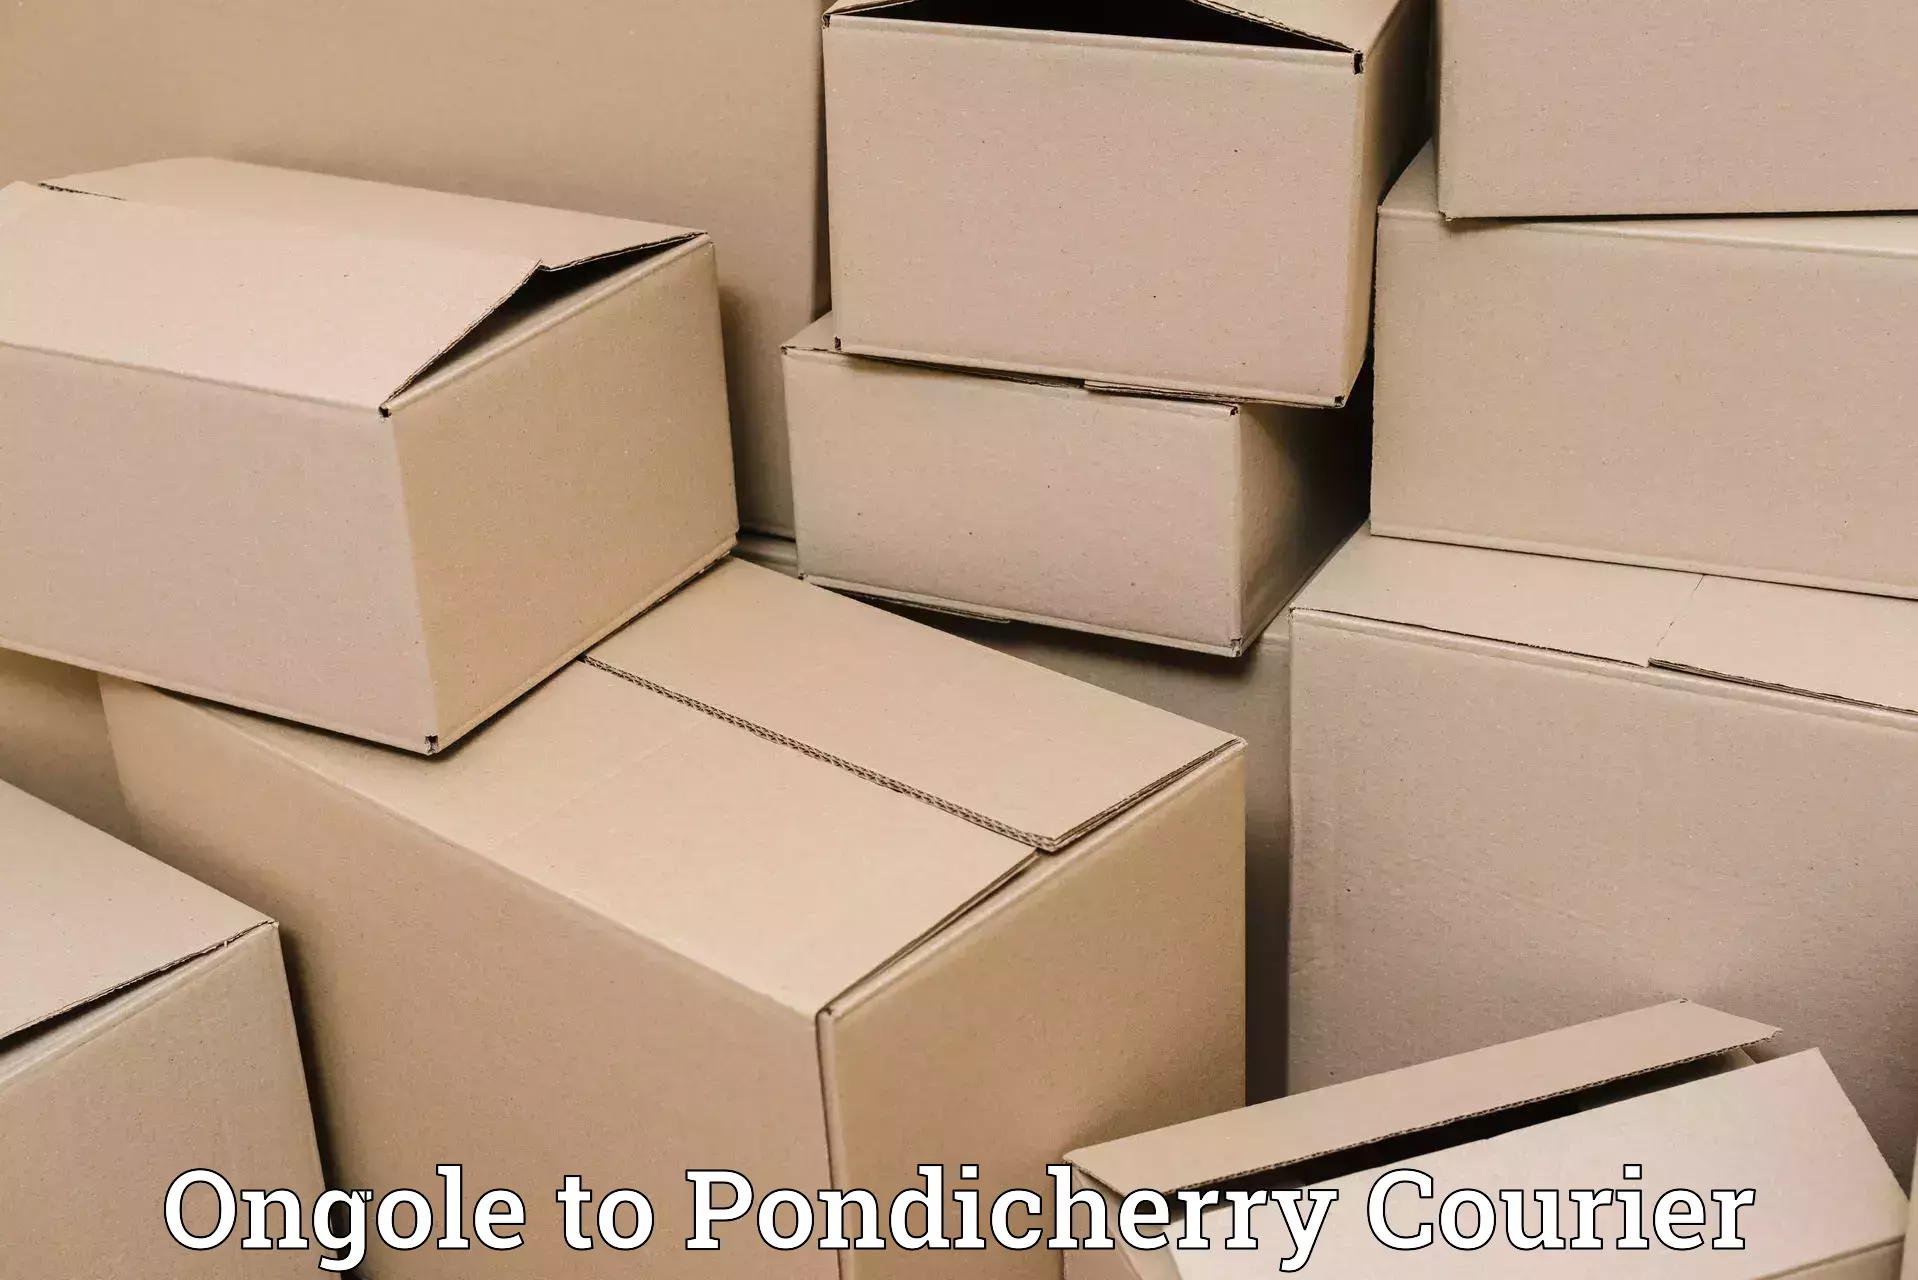 Multi-city courier Ongole to Pondicherry